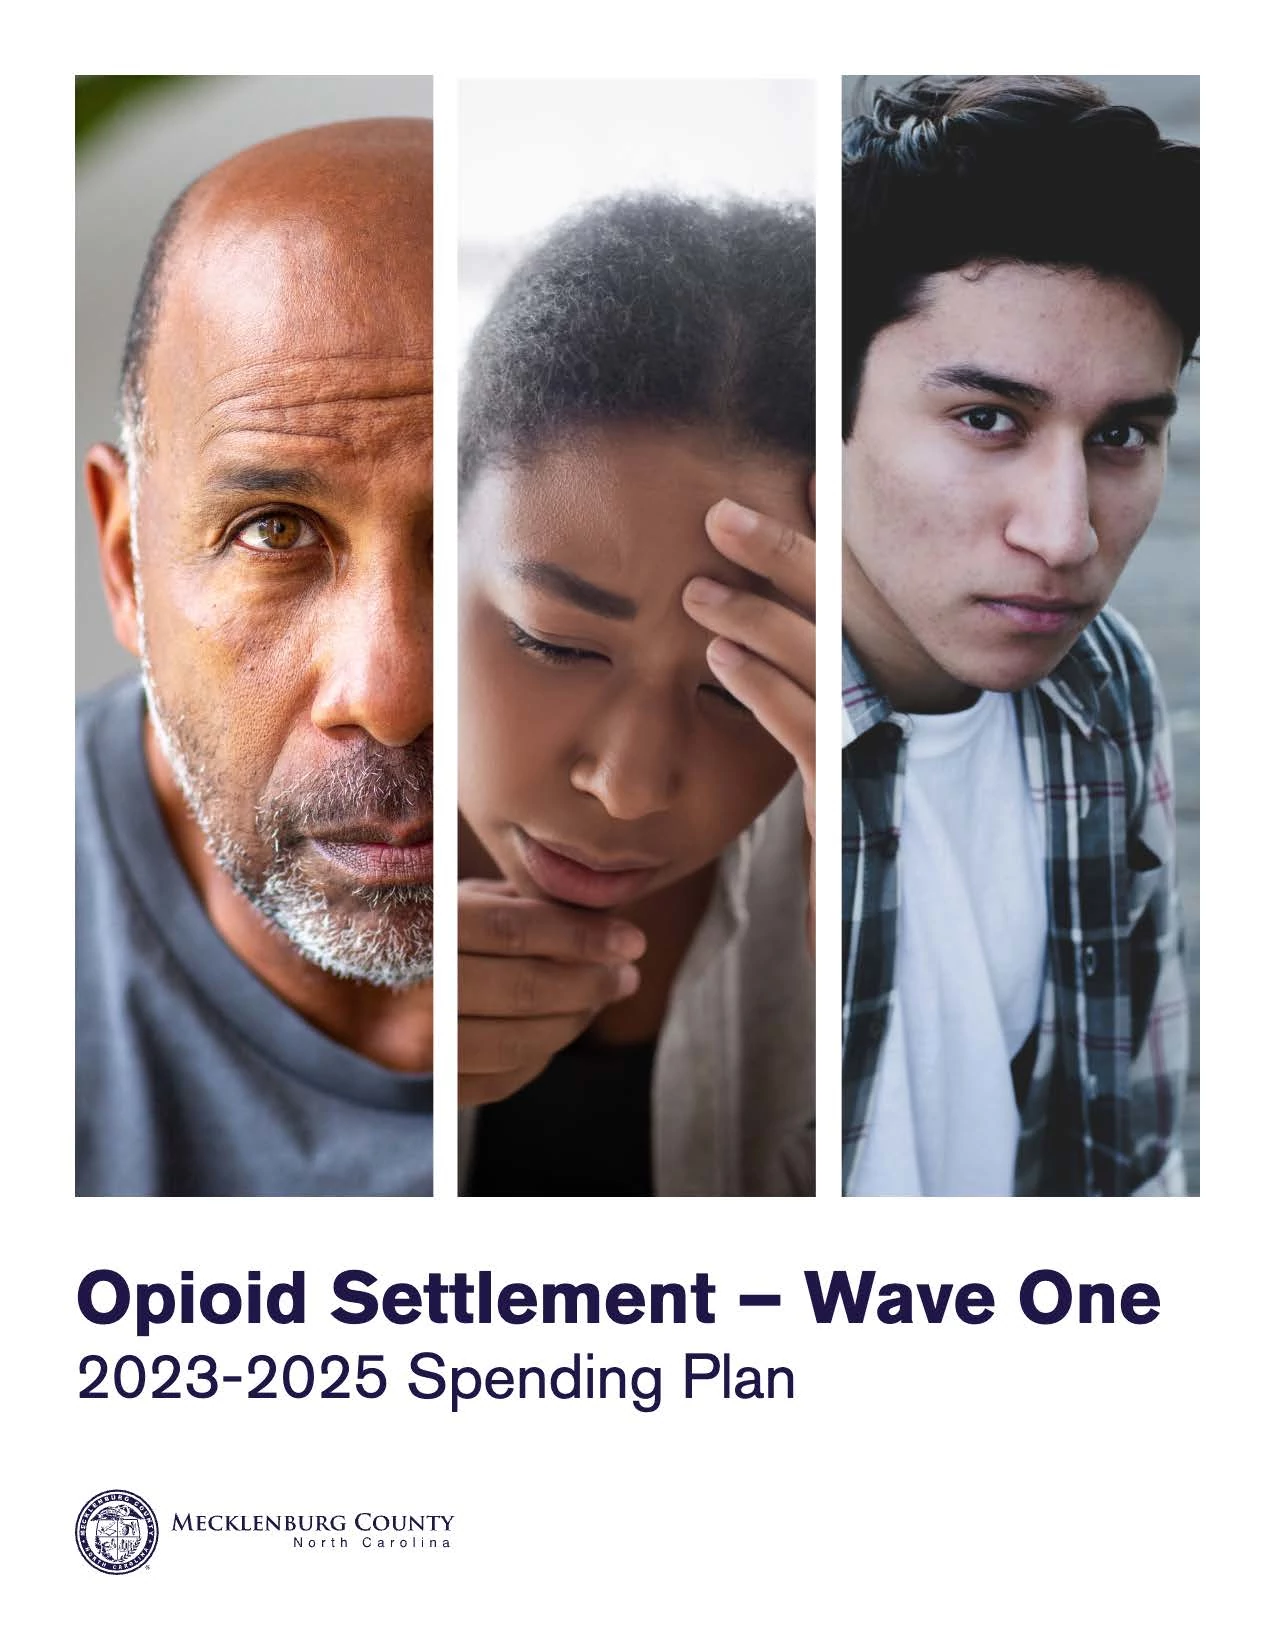 Cover image for the Opioid Settlement - Wave One Spending Plan (2023 - 2025)